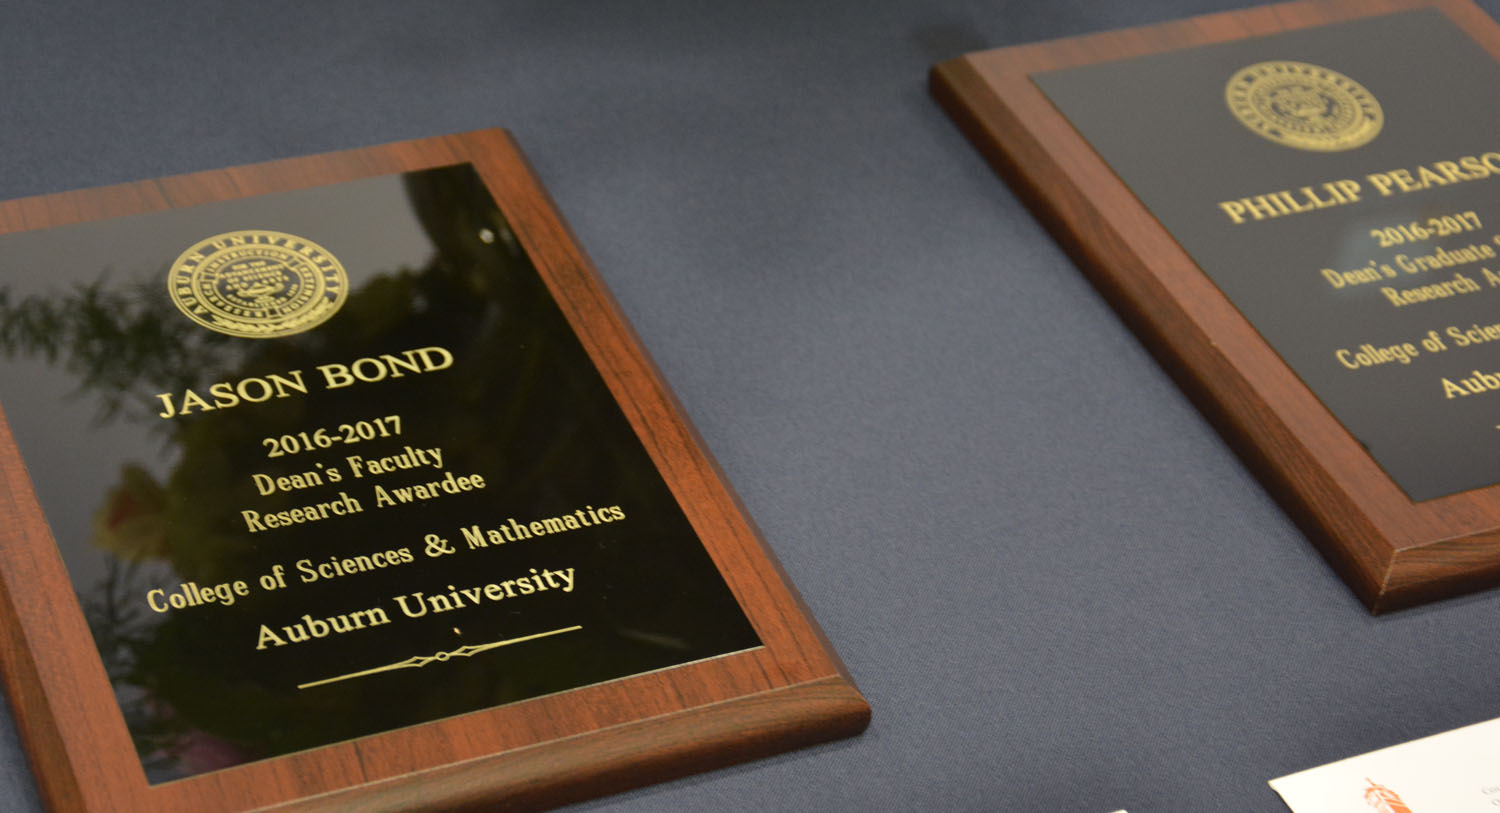 Plaques of the Research Award winners on a table